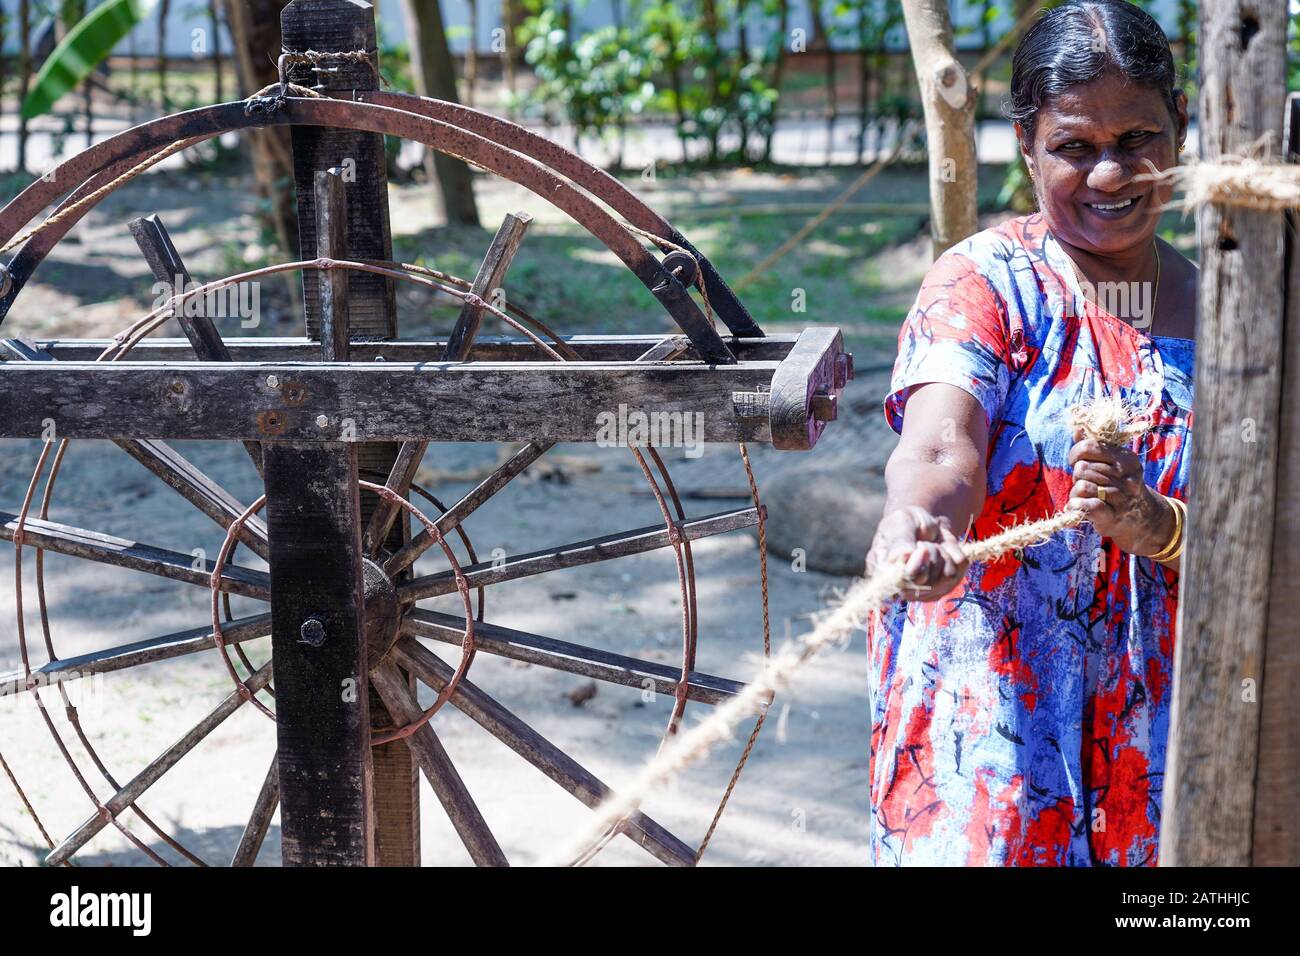 Locals demonstrating the making of rope from coconut hair. From a series of travel photos in Kerala, South India. Photo date: Friday, January 17, 2020 Stock Photo